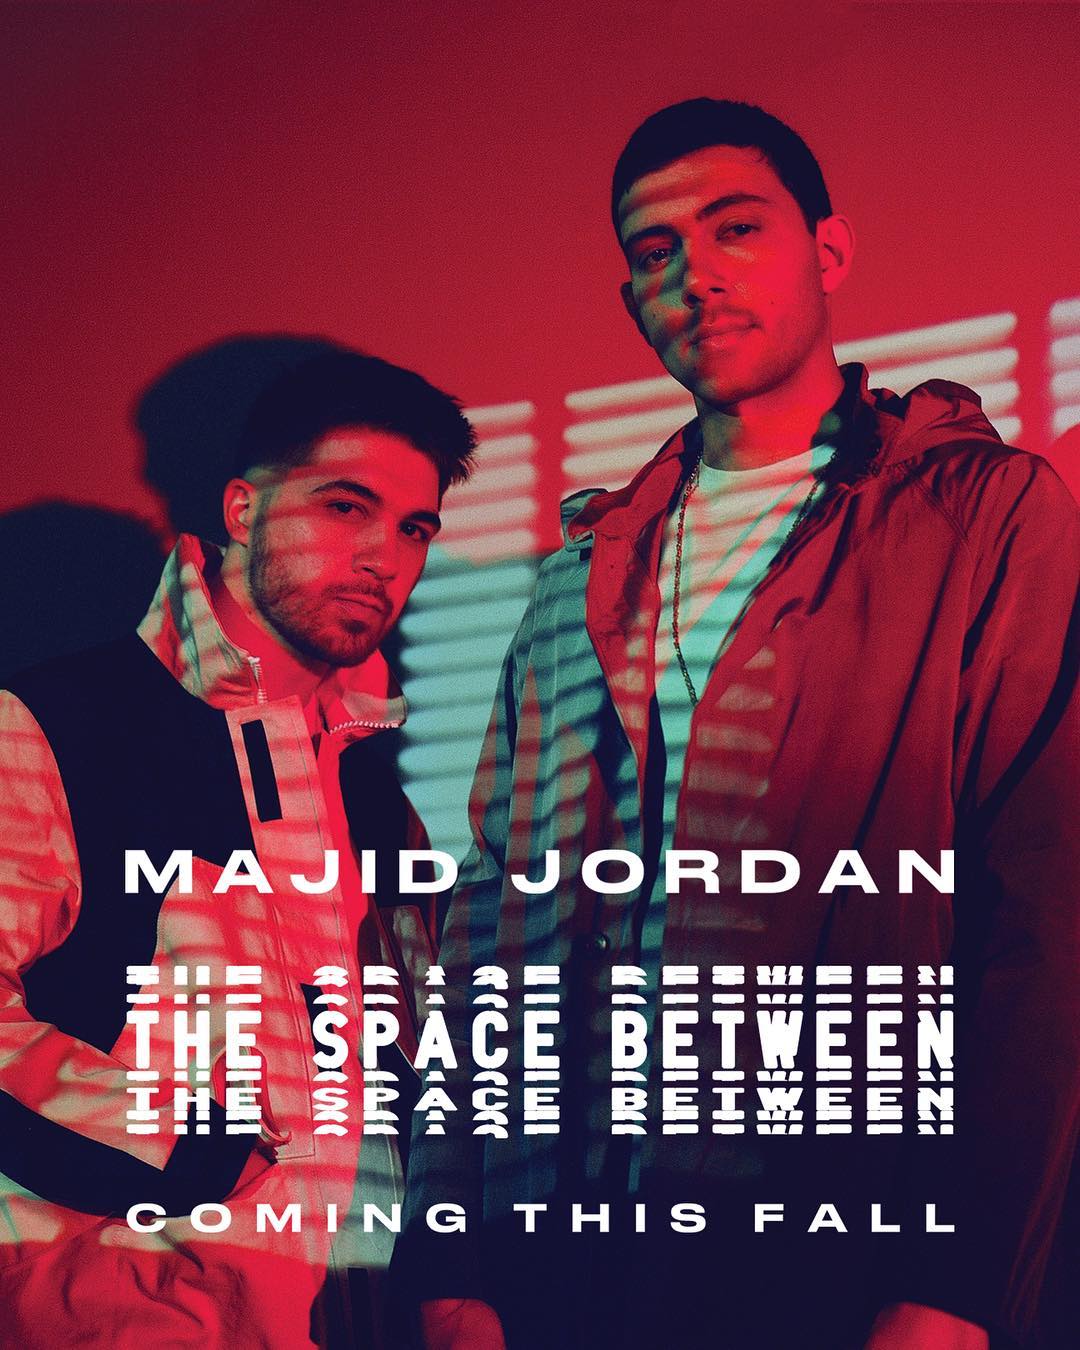 Majid Jordan Announces Their New Album “The Space Between” + Other OVO Projects Teased [PEEP]